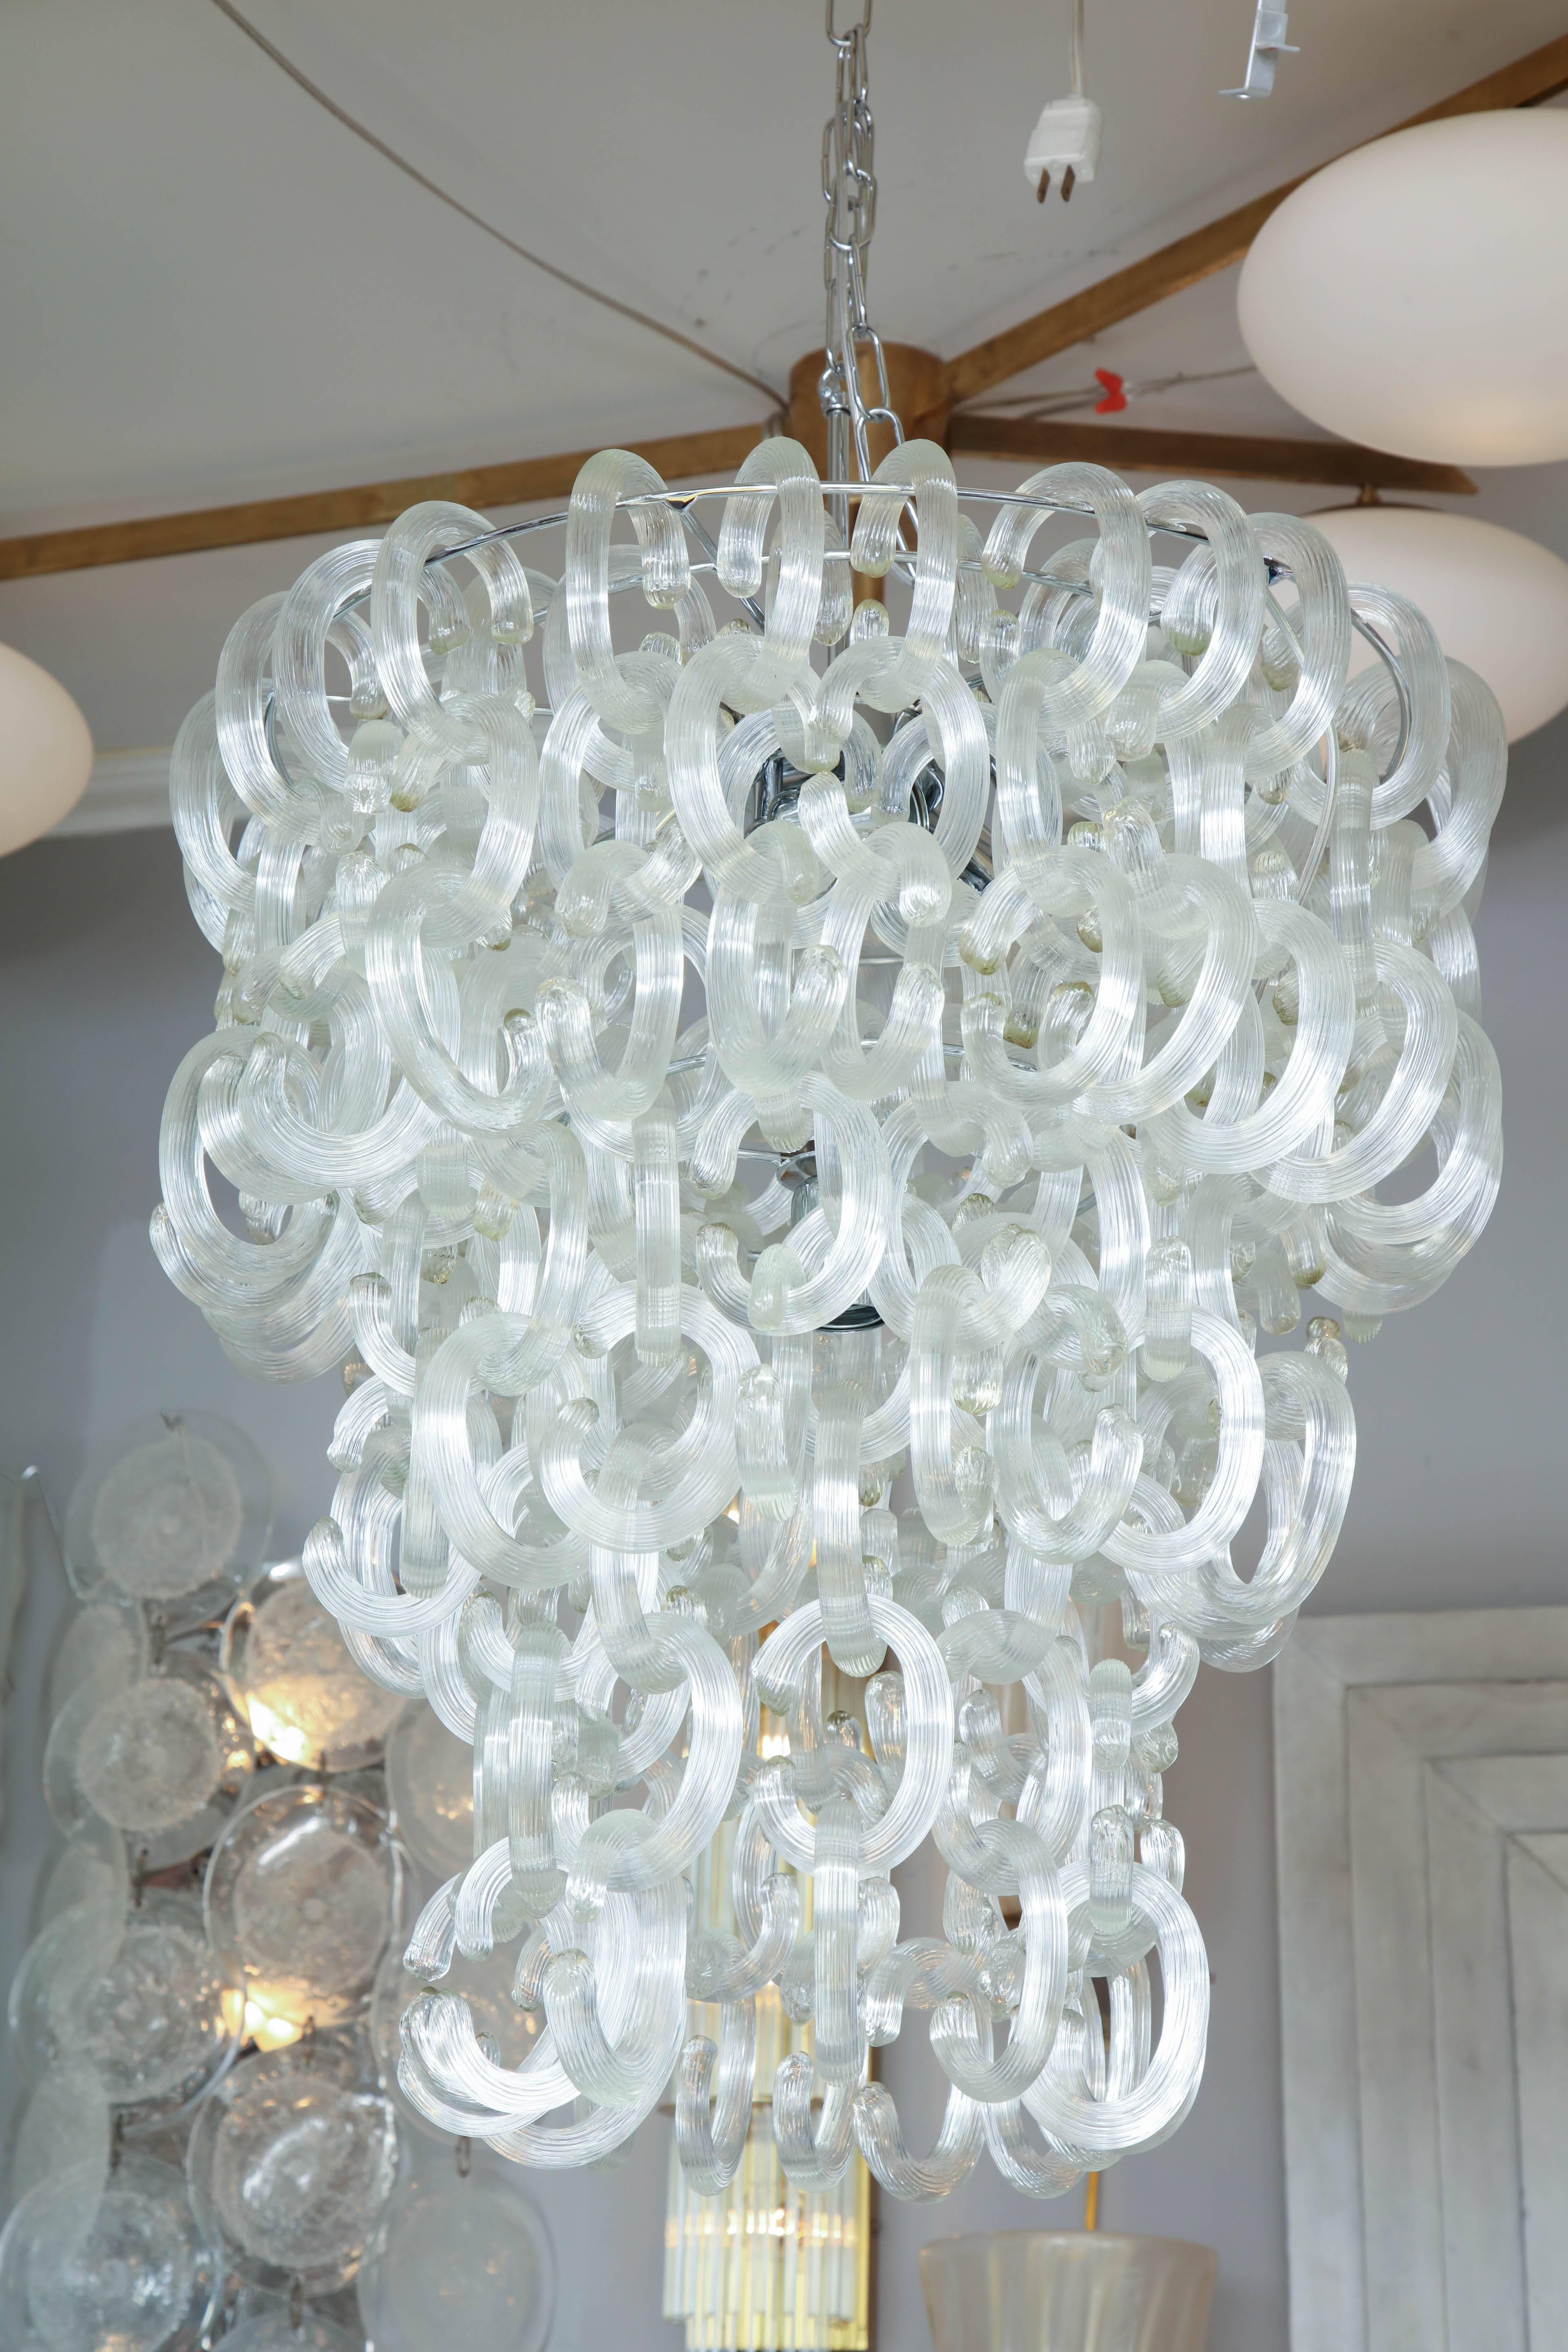 Custom Clear Murano C-link glass chandelier. Customization is available in different sizes, shapes, glass colors and finishes.